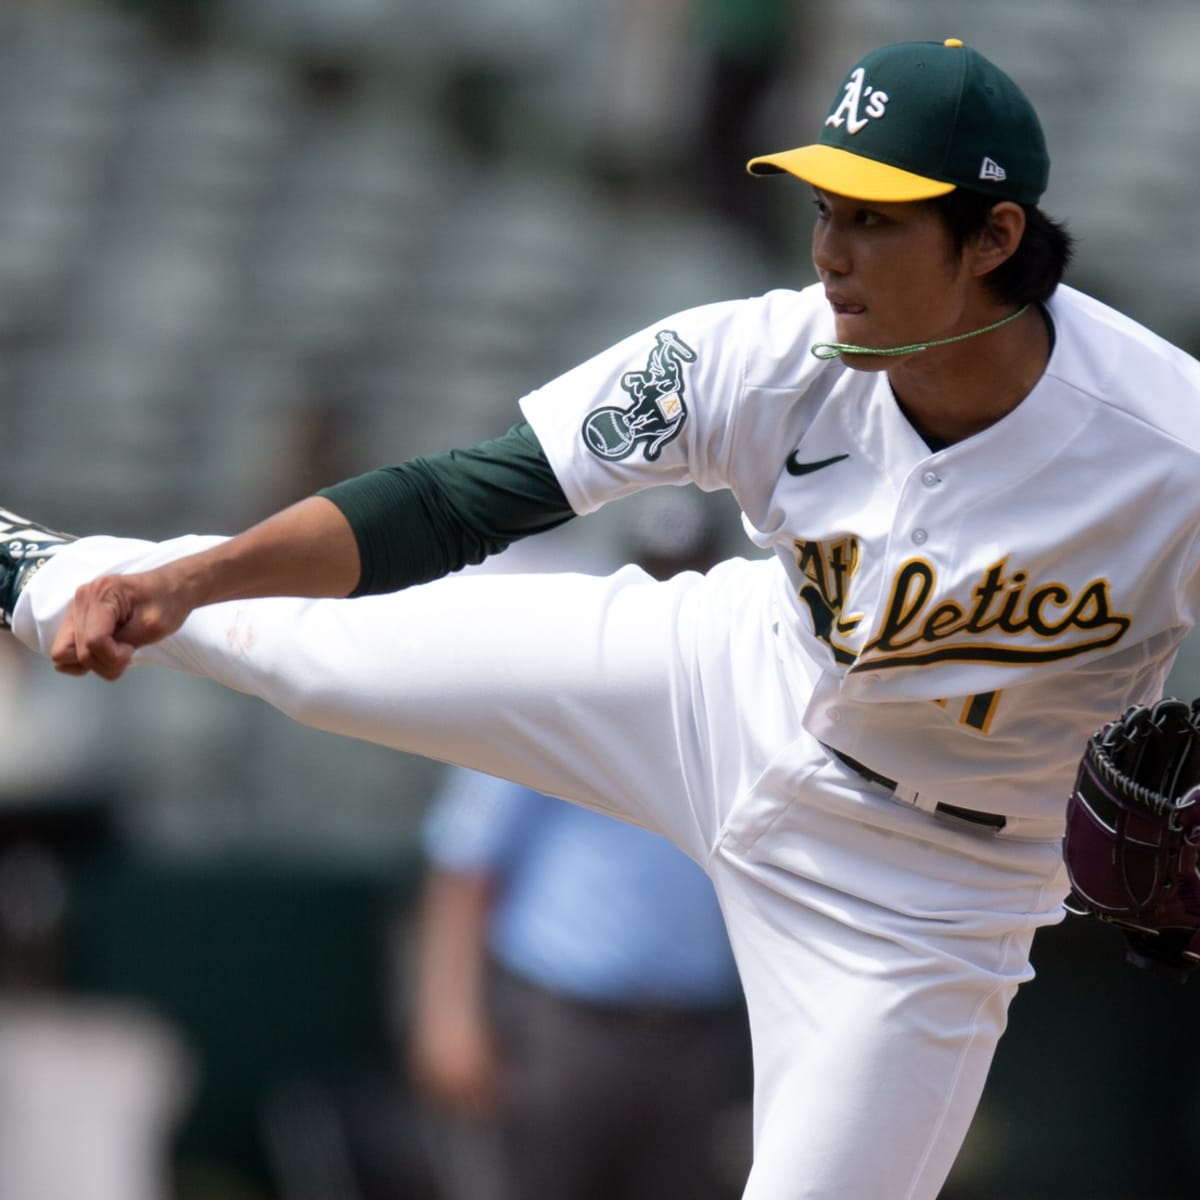 Shintaro Fujinami joins first-place Orioles after trade: 'I'll do